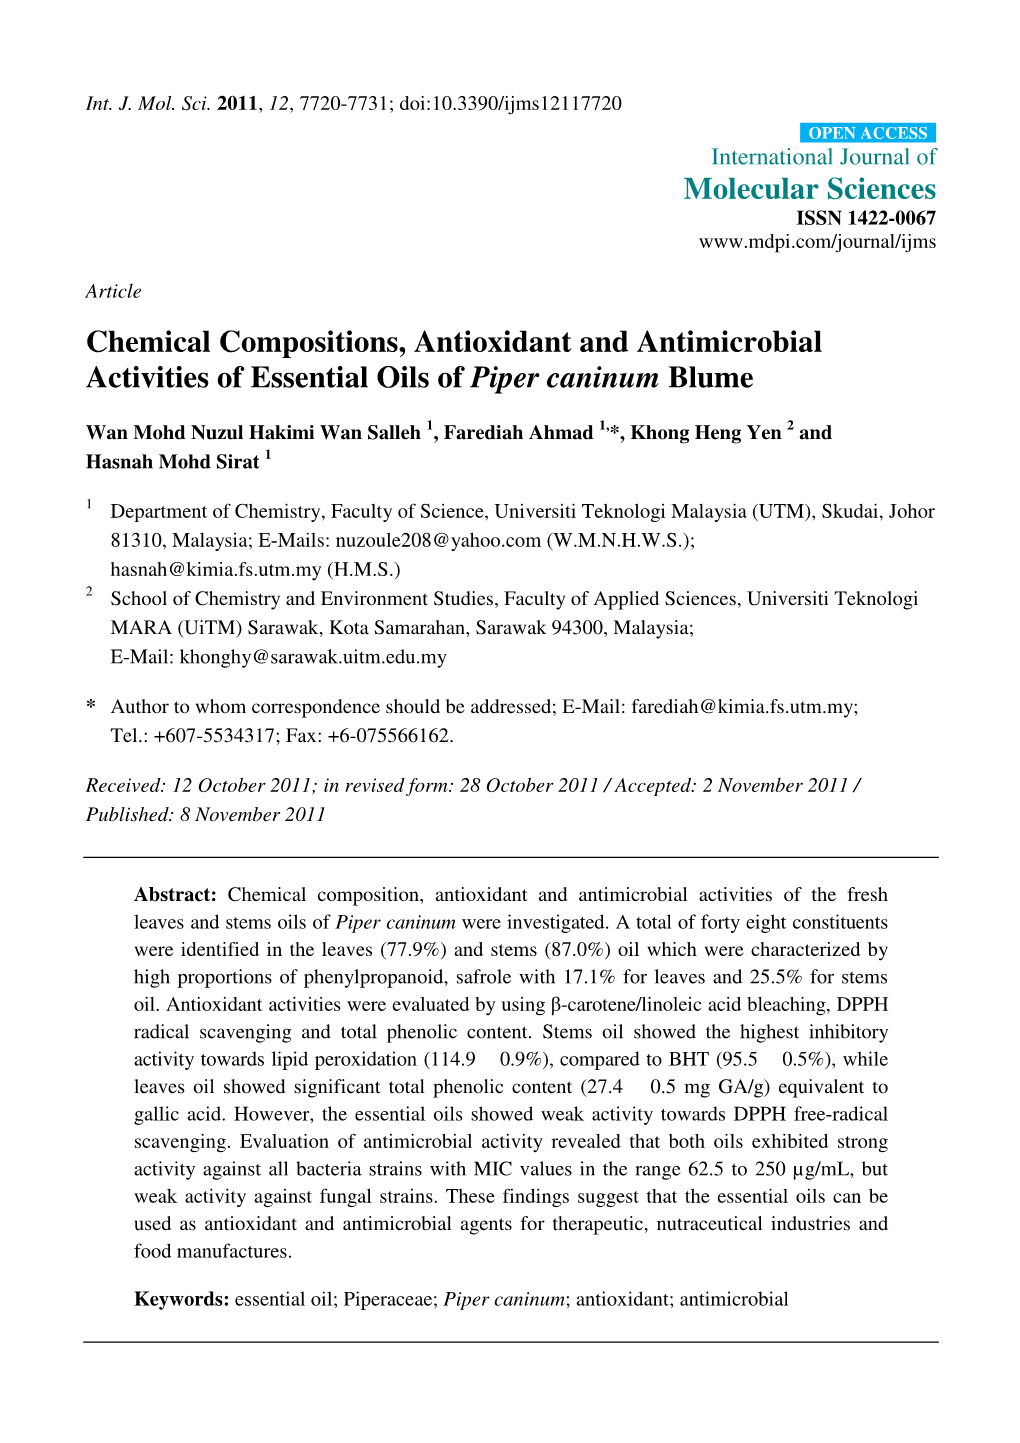 Chemical Compositions, Antioxidant and Antimicrobial Activities of Essential Oils of Piper Caninum Blume